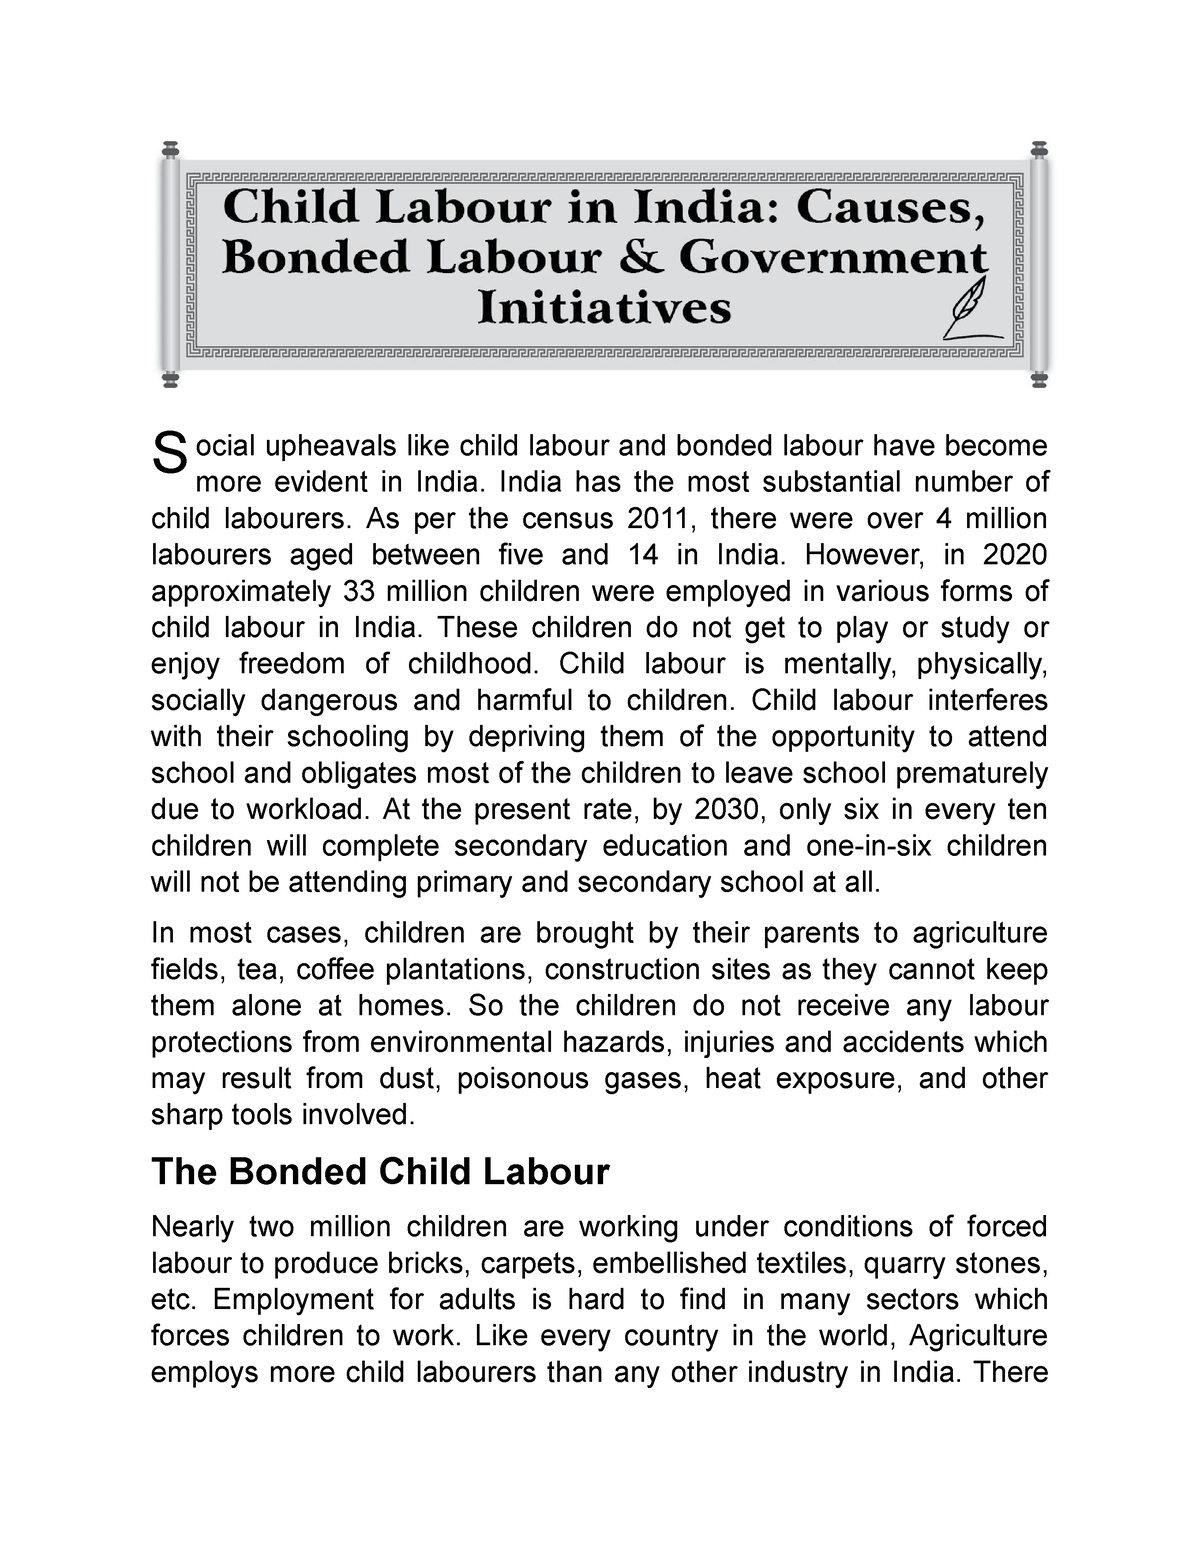 how to stop child labour in india essay